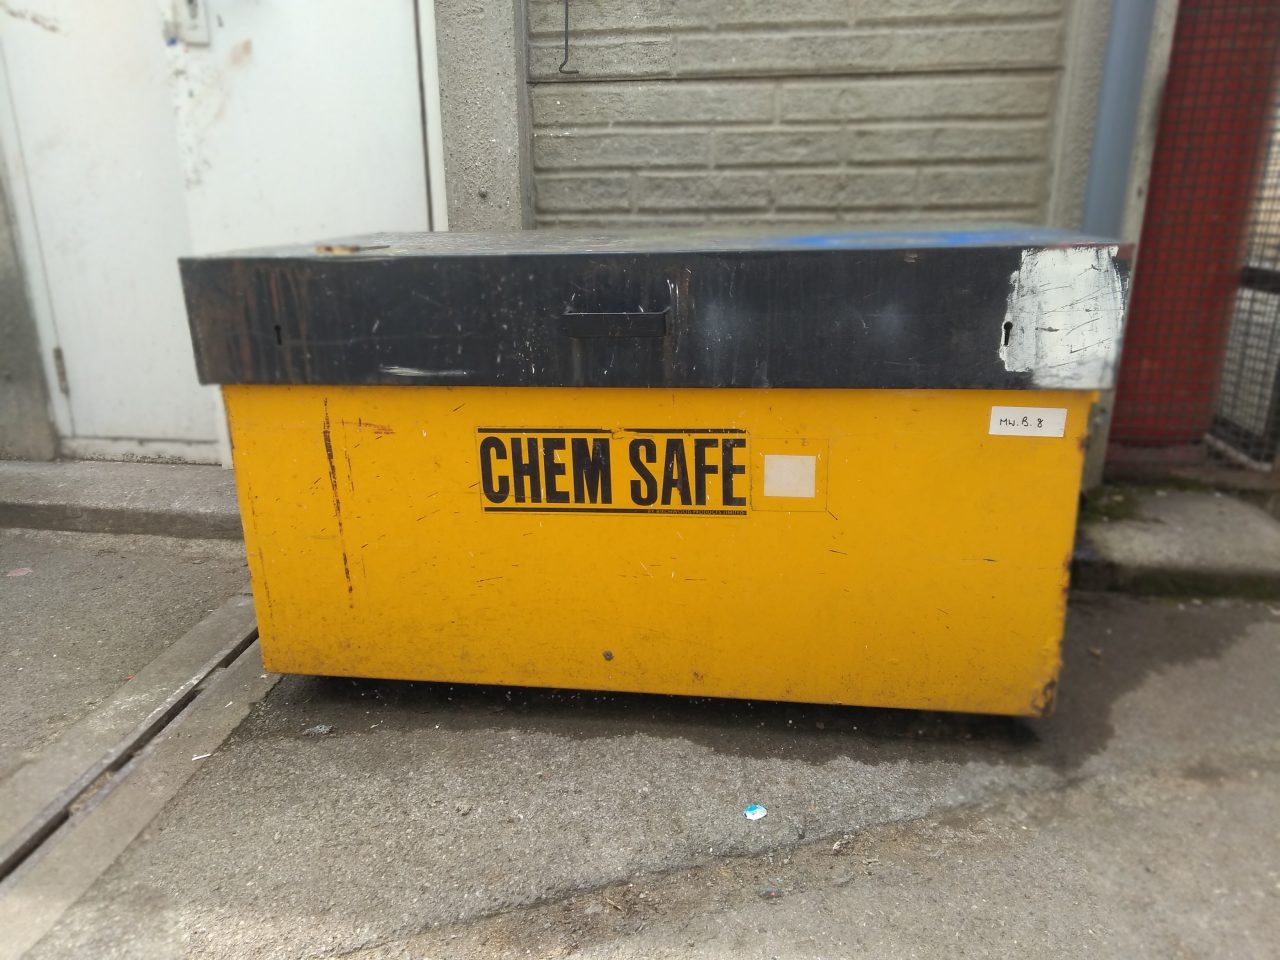 Untitled (1 of an edition of 3), chemicals storage container, paper label, paint marks,, h 75cm w 119, d 64.5cm, 2019 NFS